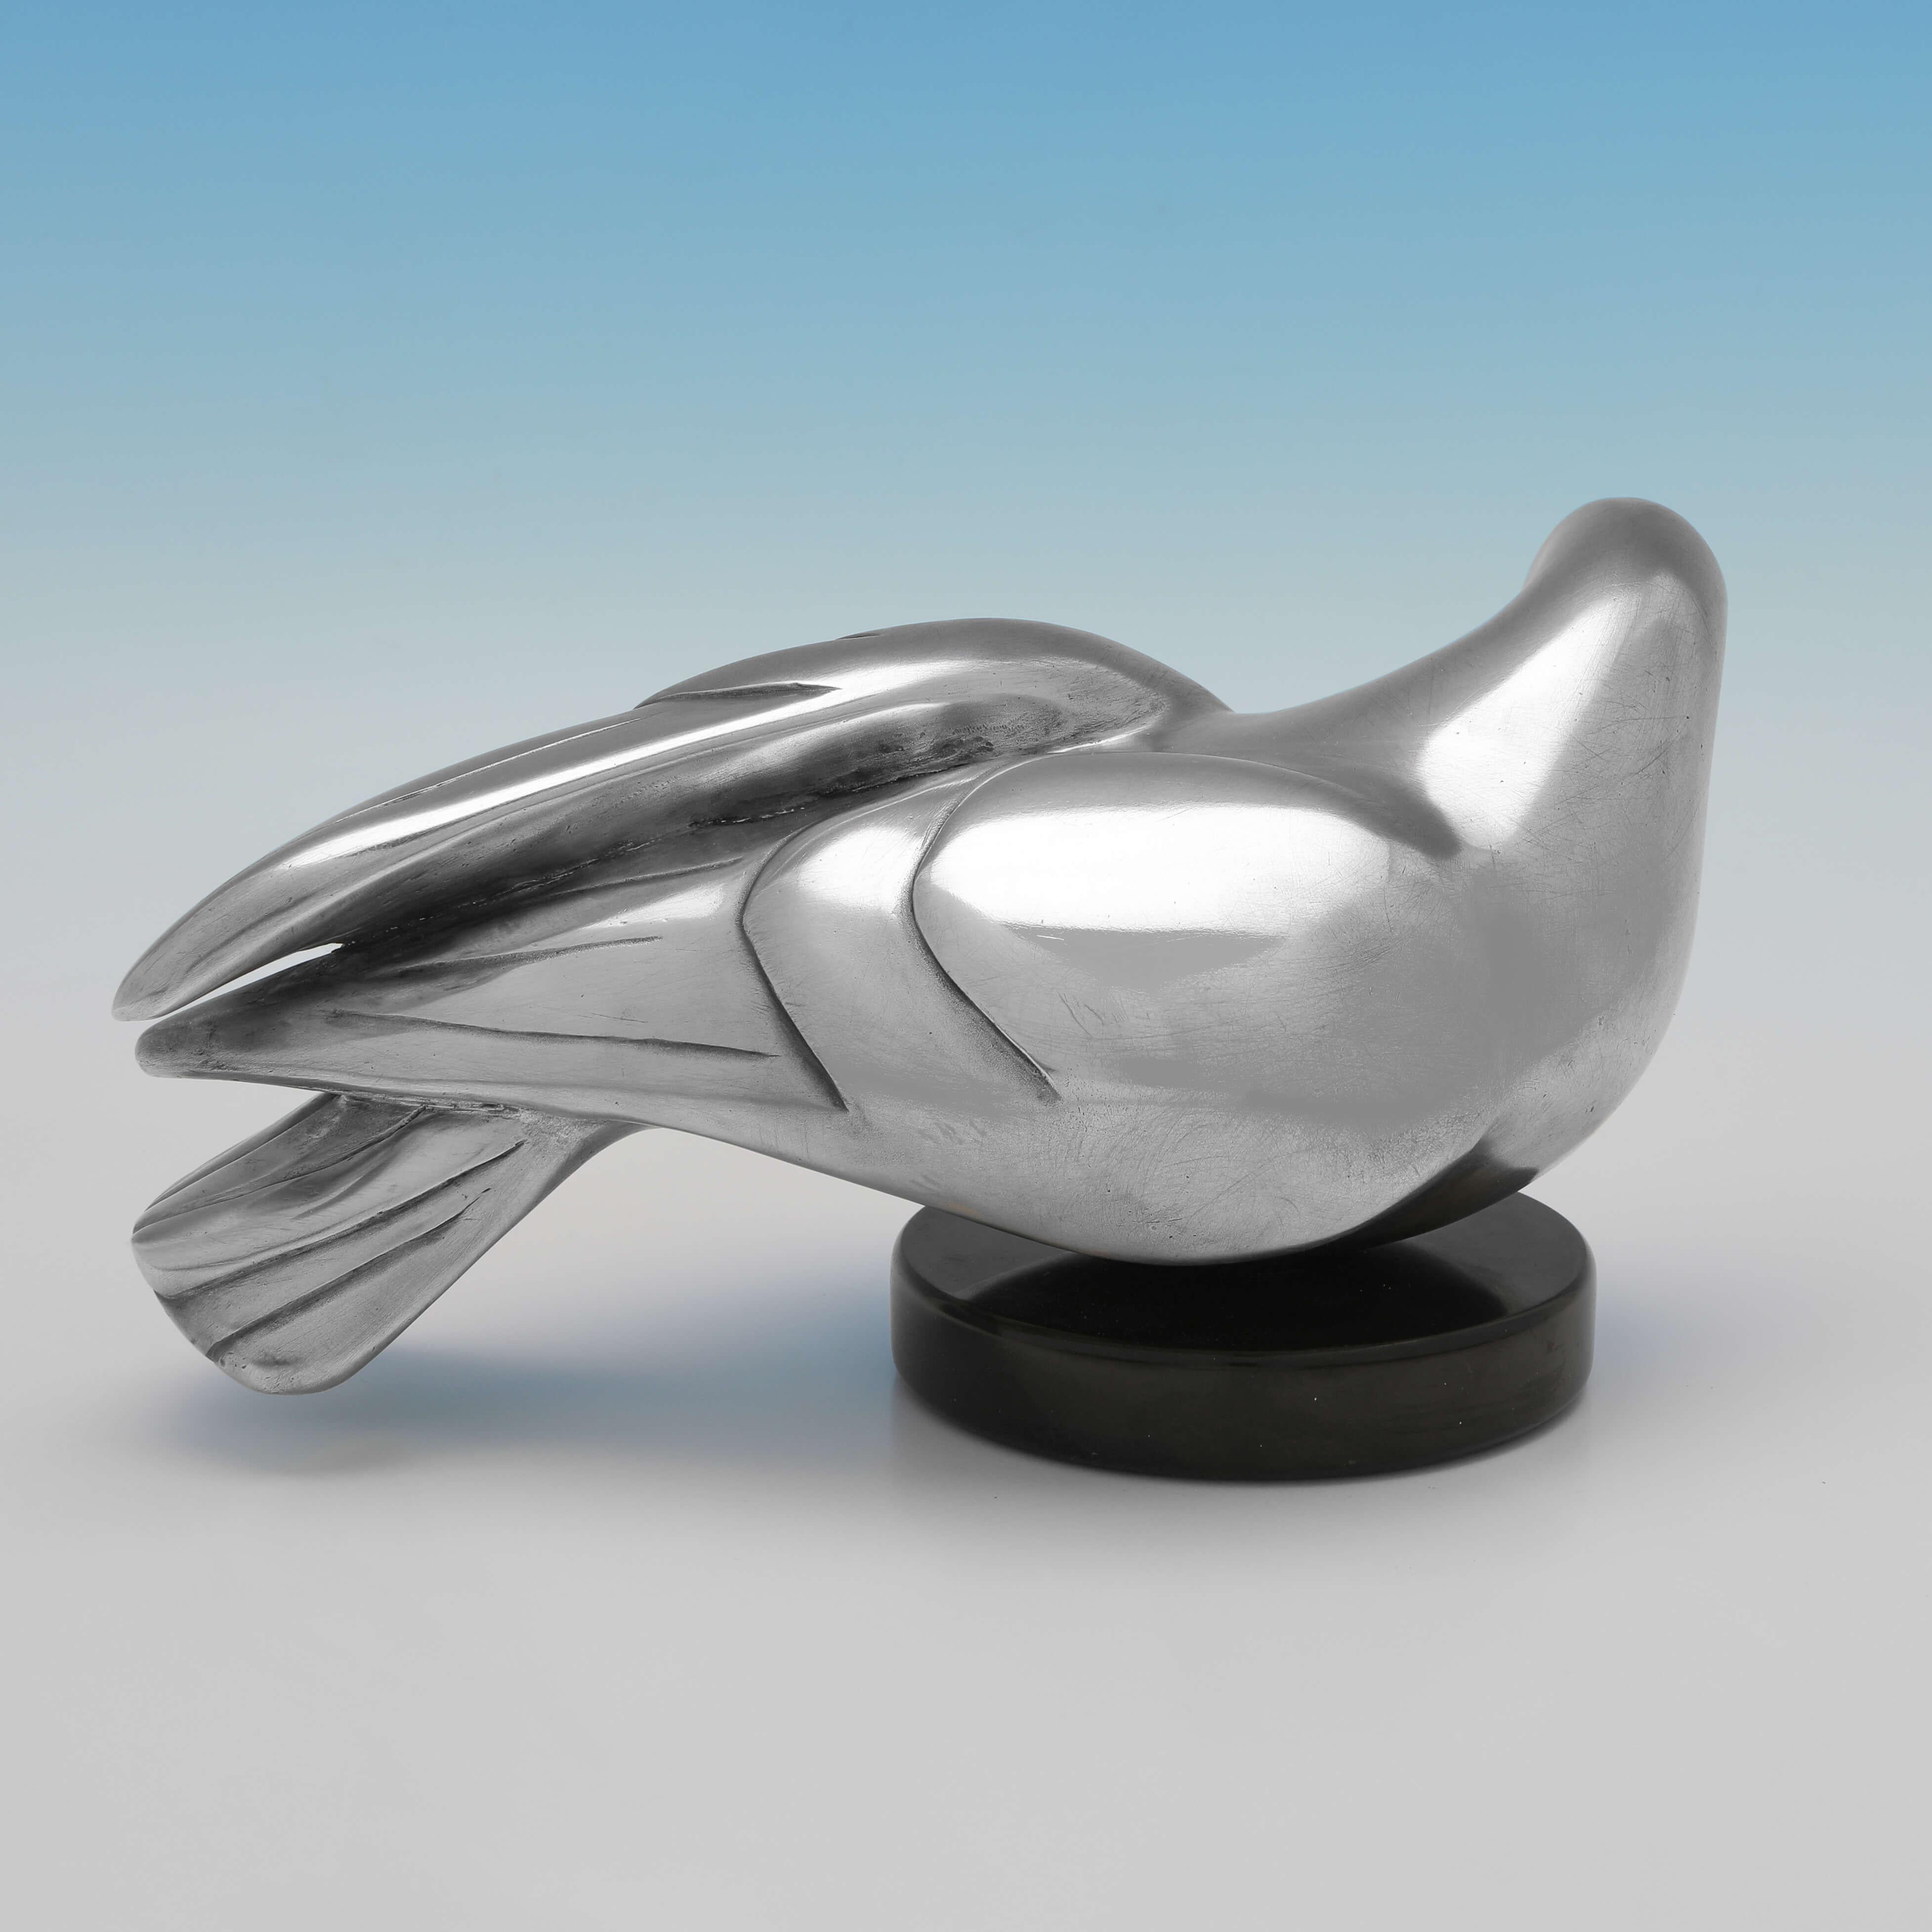 This interesting sculptural representation of a dove carries hallmarks for London in 1999, and the makers mark for the Morris Singer Foundry. 

The dove is number 2 of a limited edition of 25 manufactured in sterling silver, designed by Mina